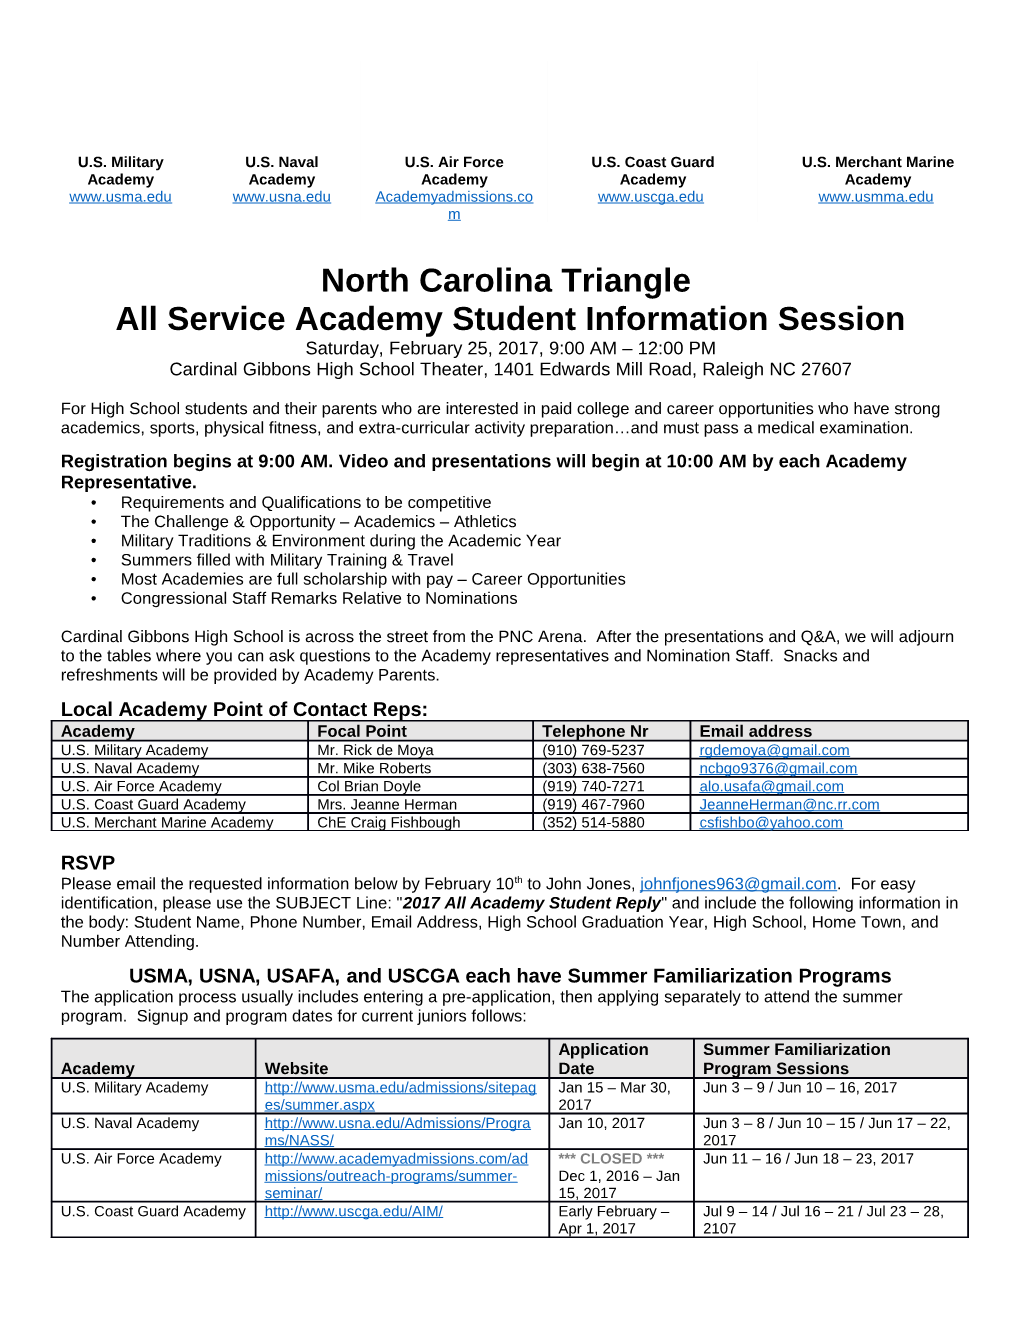 North Carolina Triangle All Service Academy Student Information Session